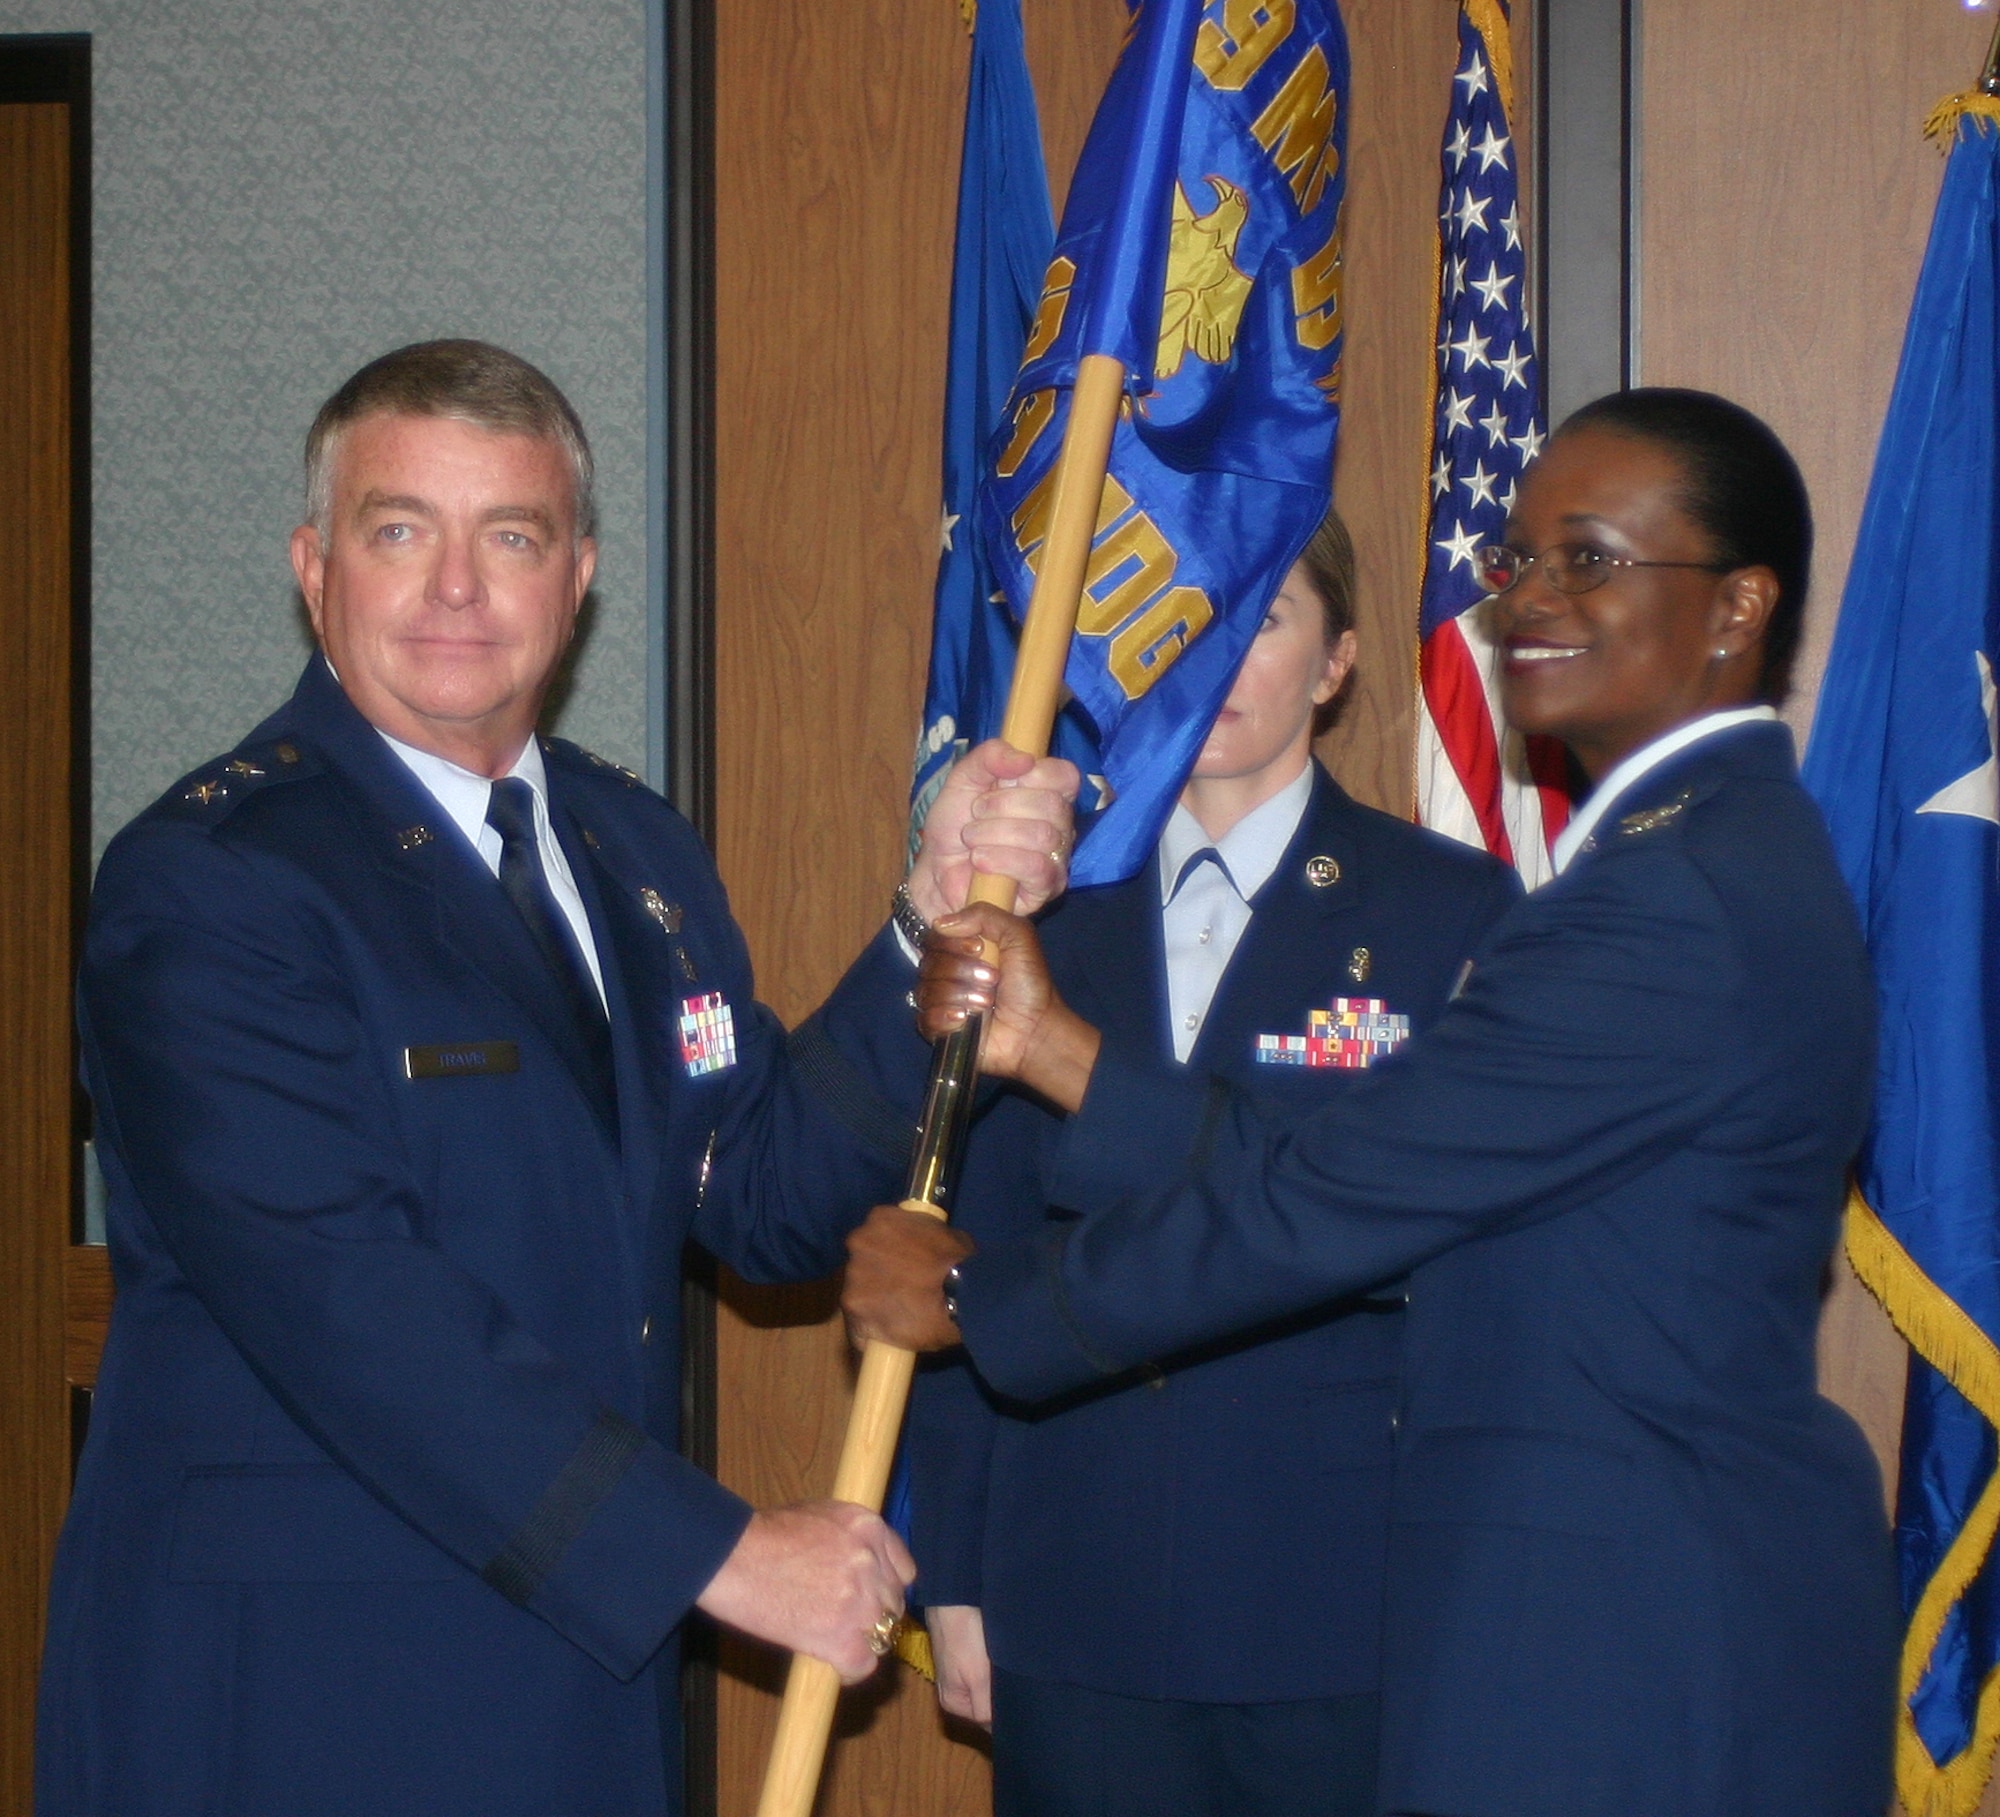 Maj. Gen. Tom Travis, 59th Medical Wing commander (left), passes the 359th Medical Group guidon to its commander, Col. Soledad Lindo-Moon, Feb. 1 at Randolph Air Force Base, Texas, during a ceremony that realigned the medical group under the 59th MDW. (U.S. Air Force photo by Sue Campbell)